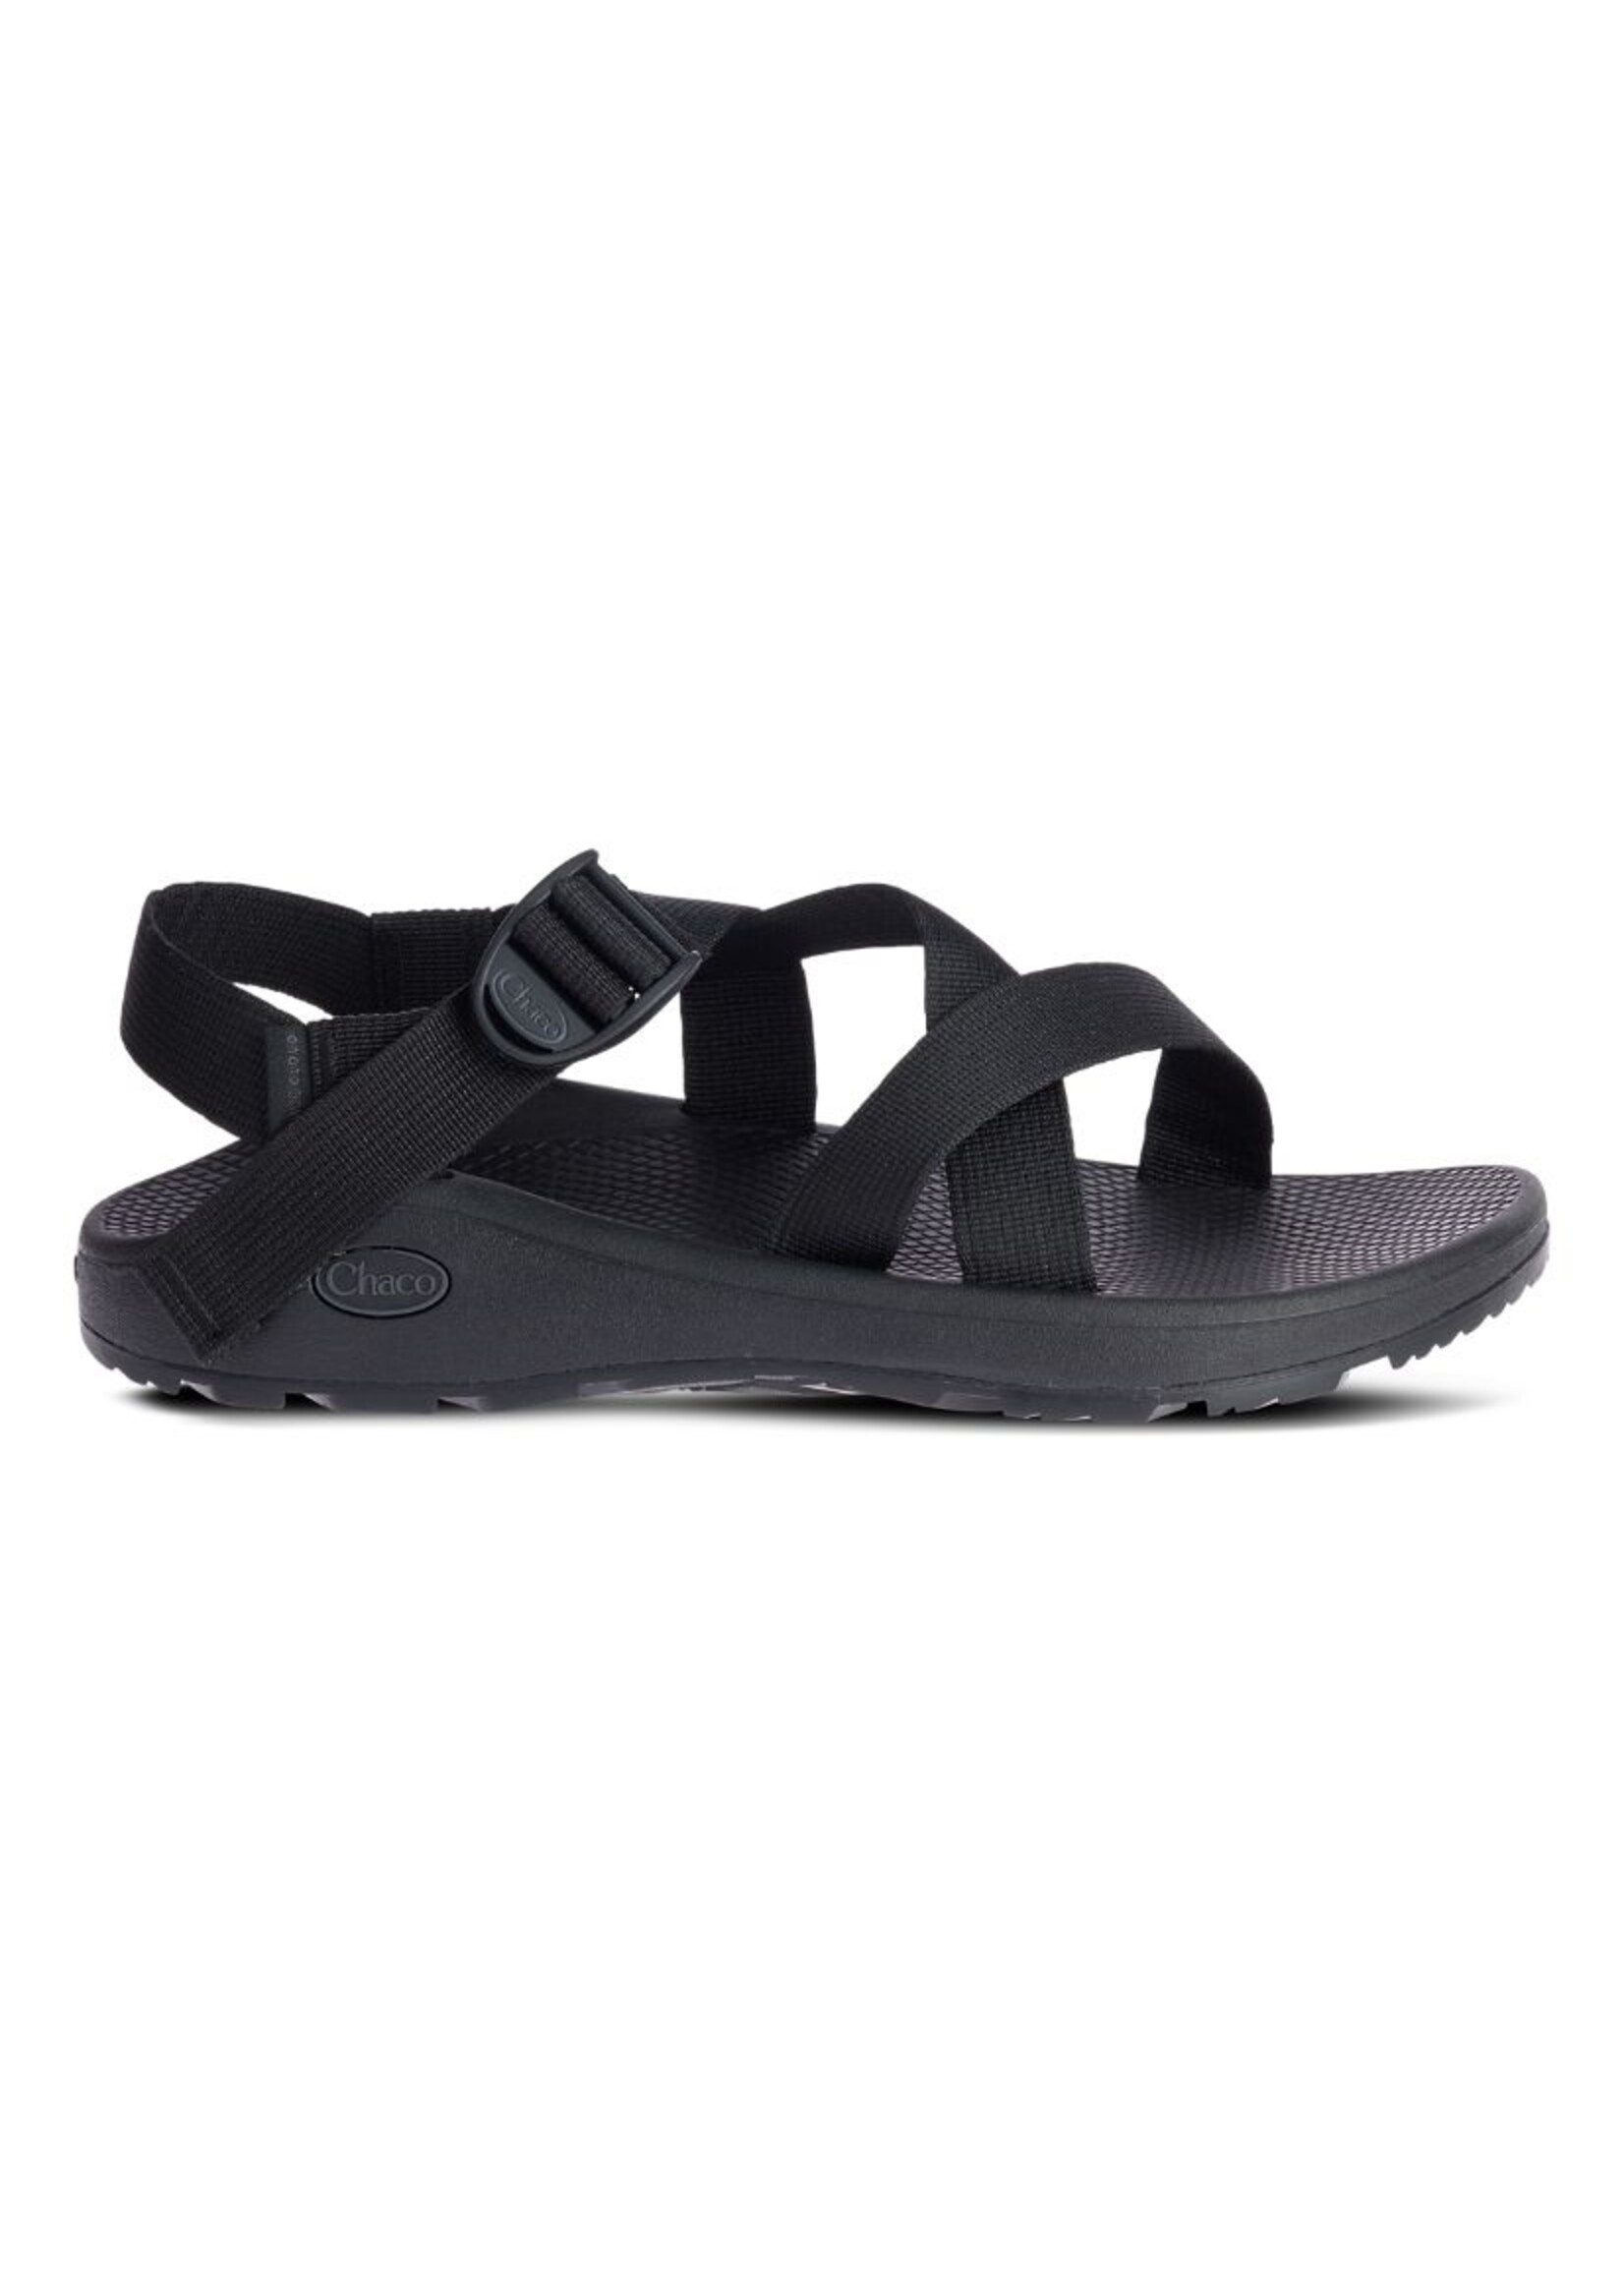 Chaco Mens ZCloud - Solid Black